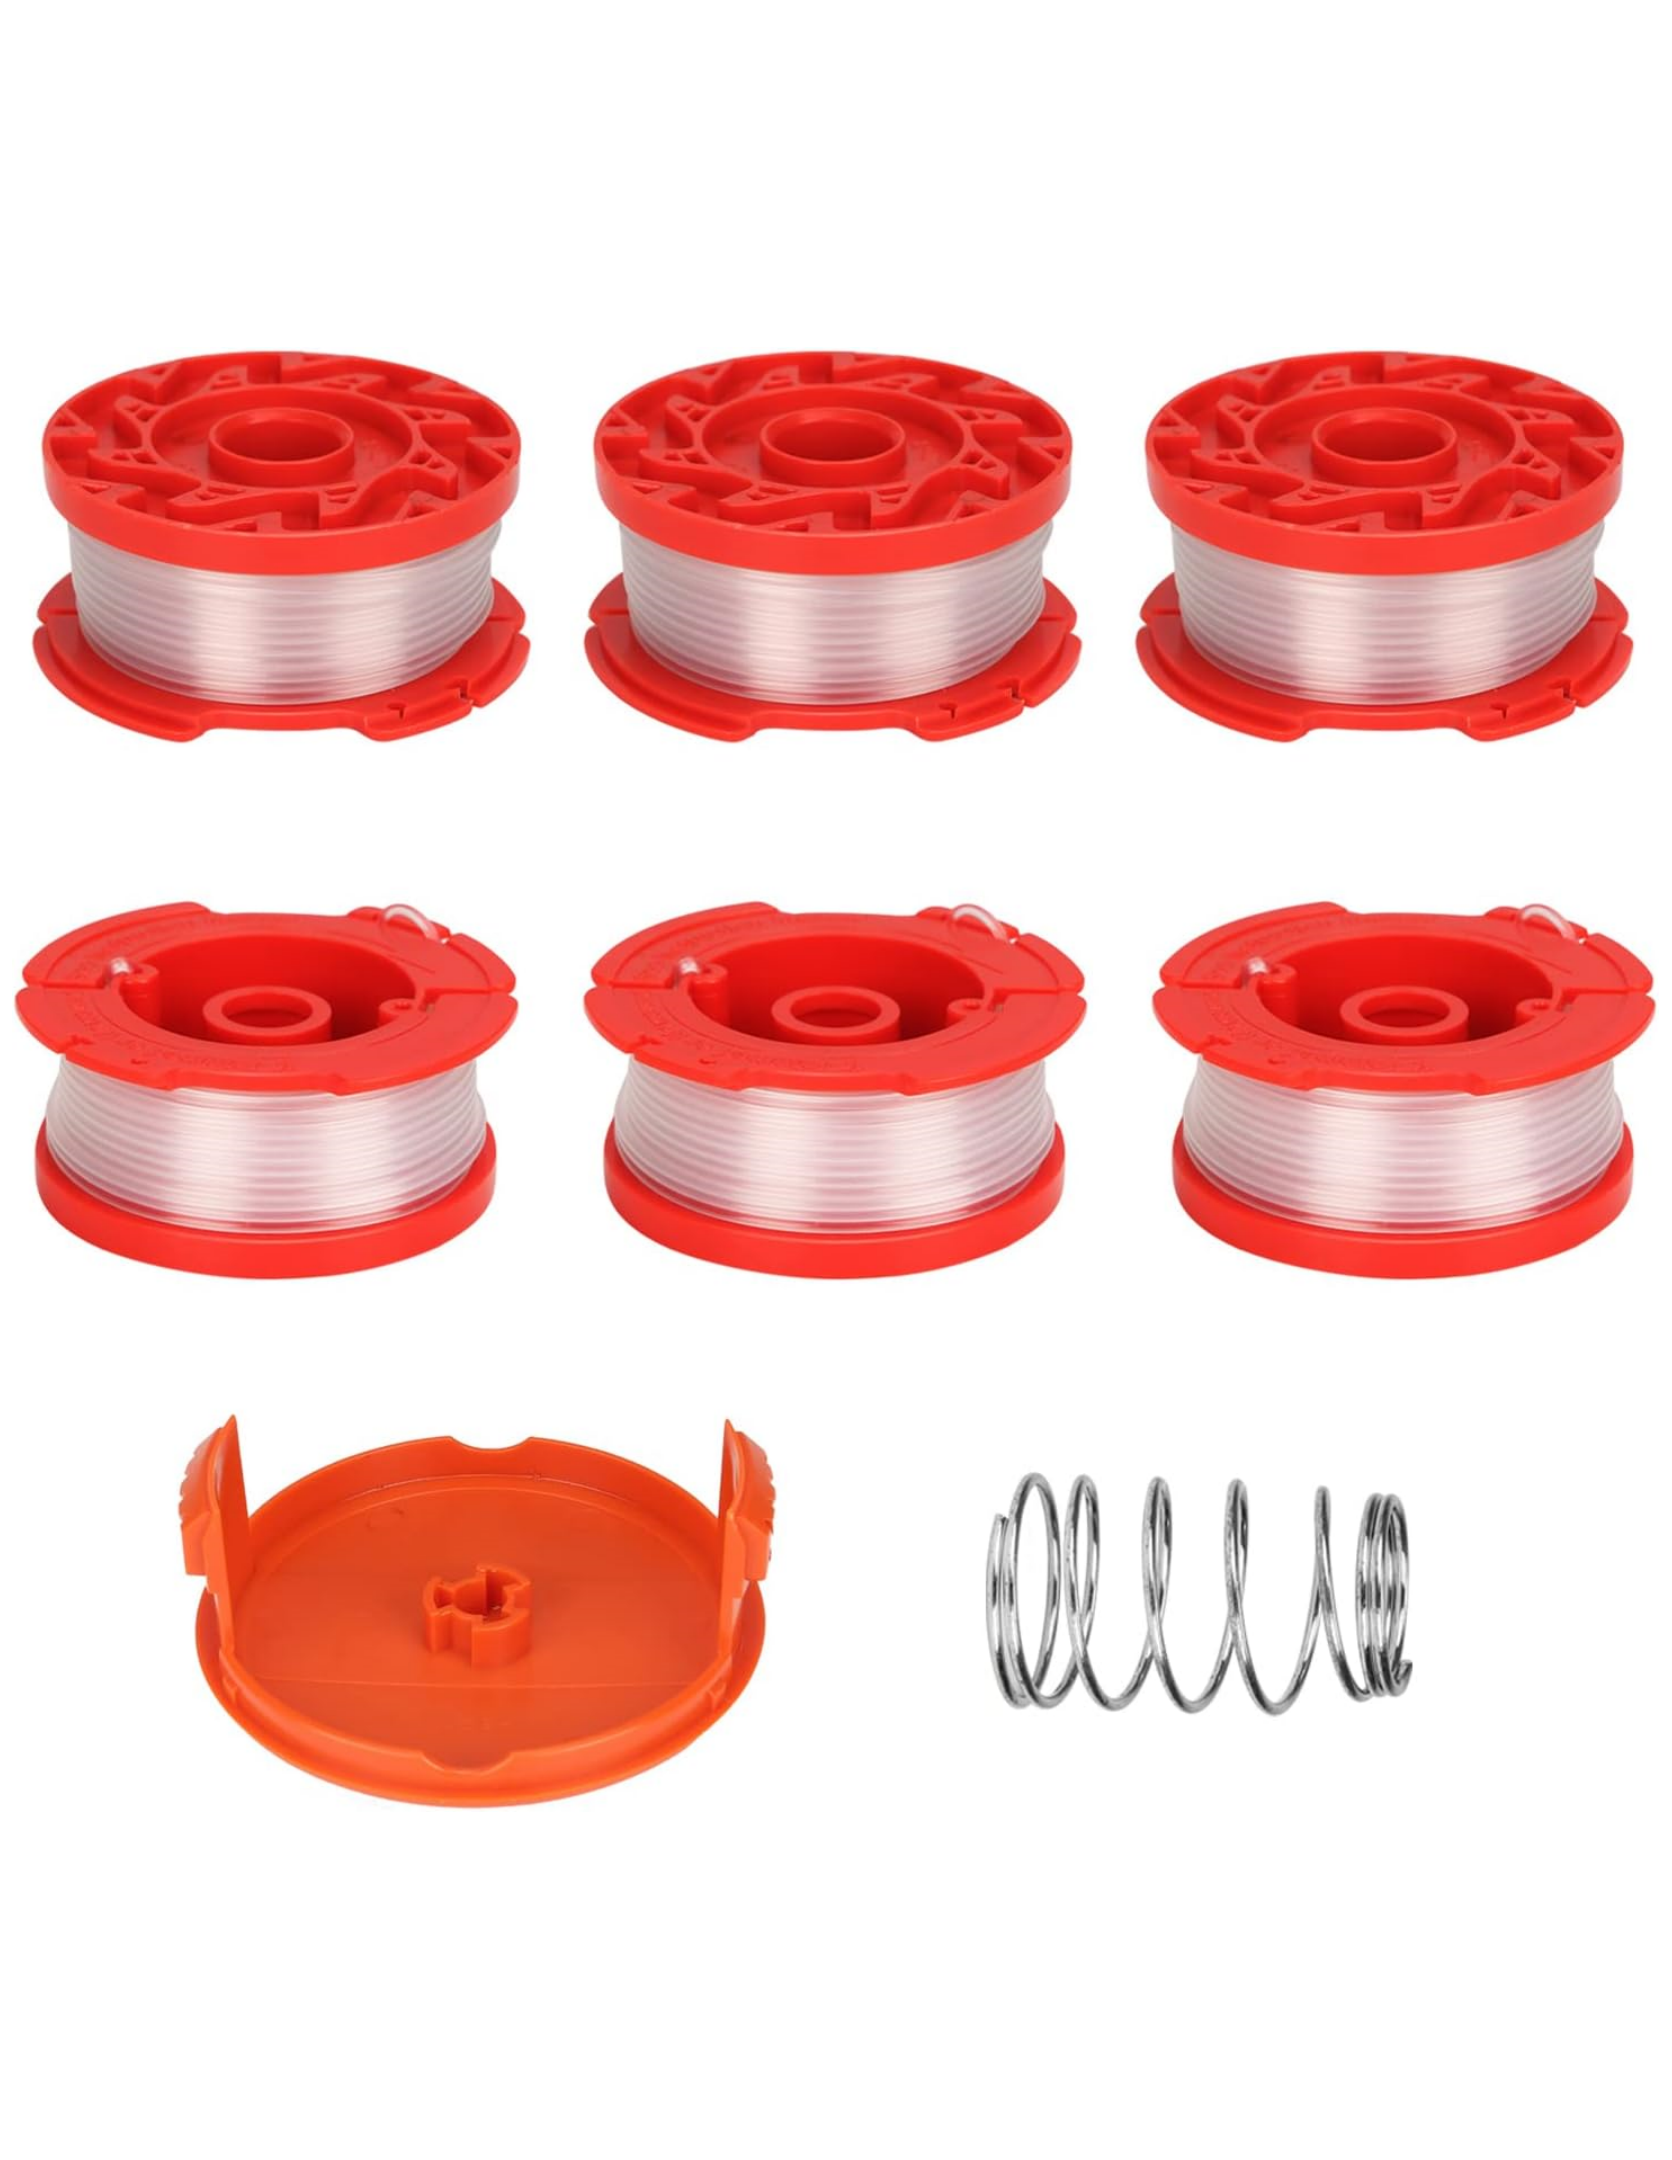 THTEN CMZST0653 CMZST065 String Trimmer Spool Line 30Ft 0.065 Compatible with Craftsman String Trimmer CMCST900,CMESTA900,CMESTE920,CMZST98020,CMCST915 CMEST913 Cap Model CMZST120SC(8 Packs)